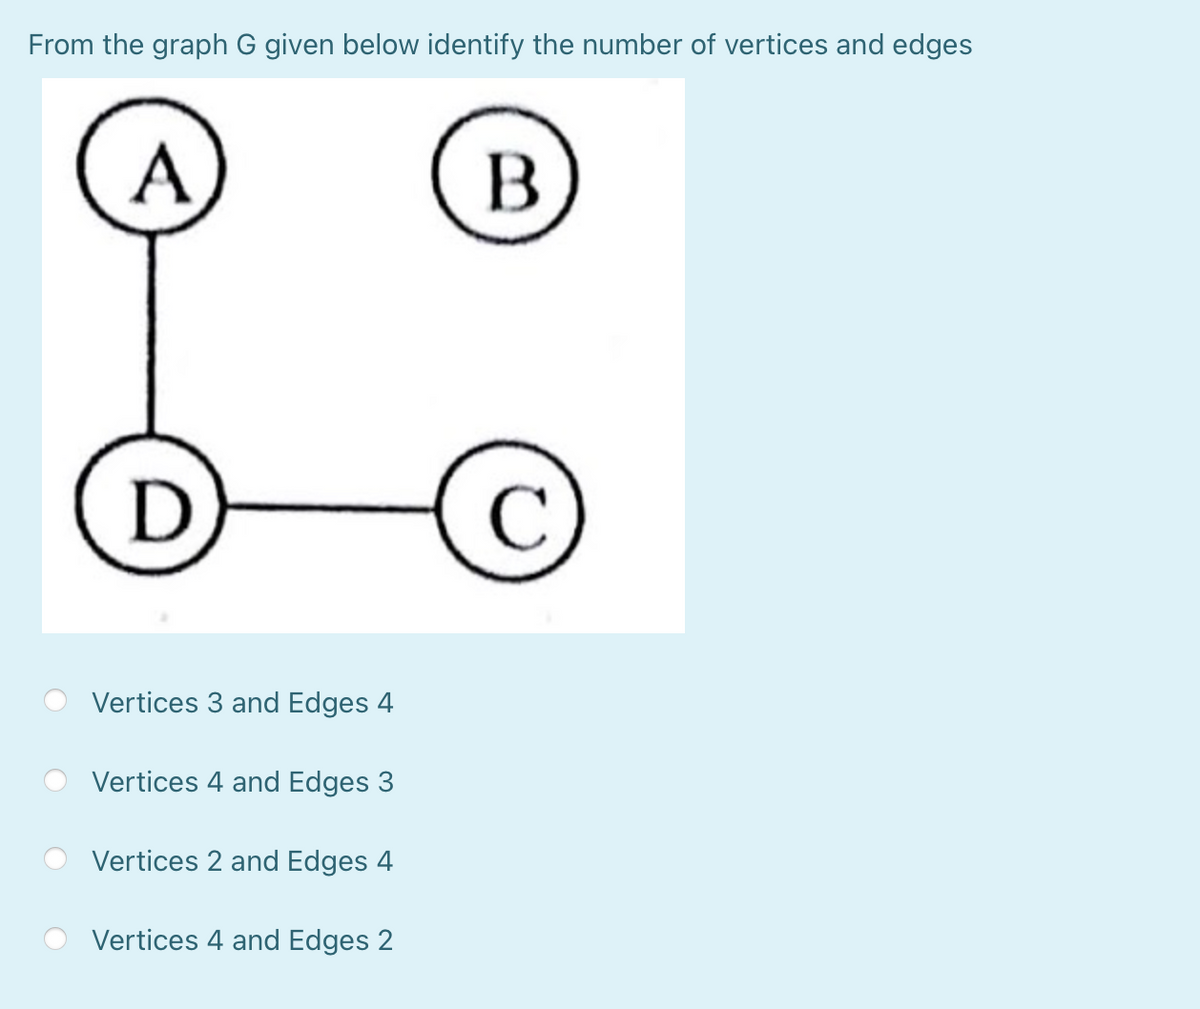 From the graph G given below identify the number of vertices and edges
A
D
C
Vertices 3 and Edges 4
Vertices 4 and Edges 3
Vertices 2 and Edges 4
Vertices 4 and Edges 2
